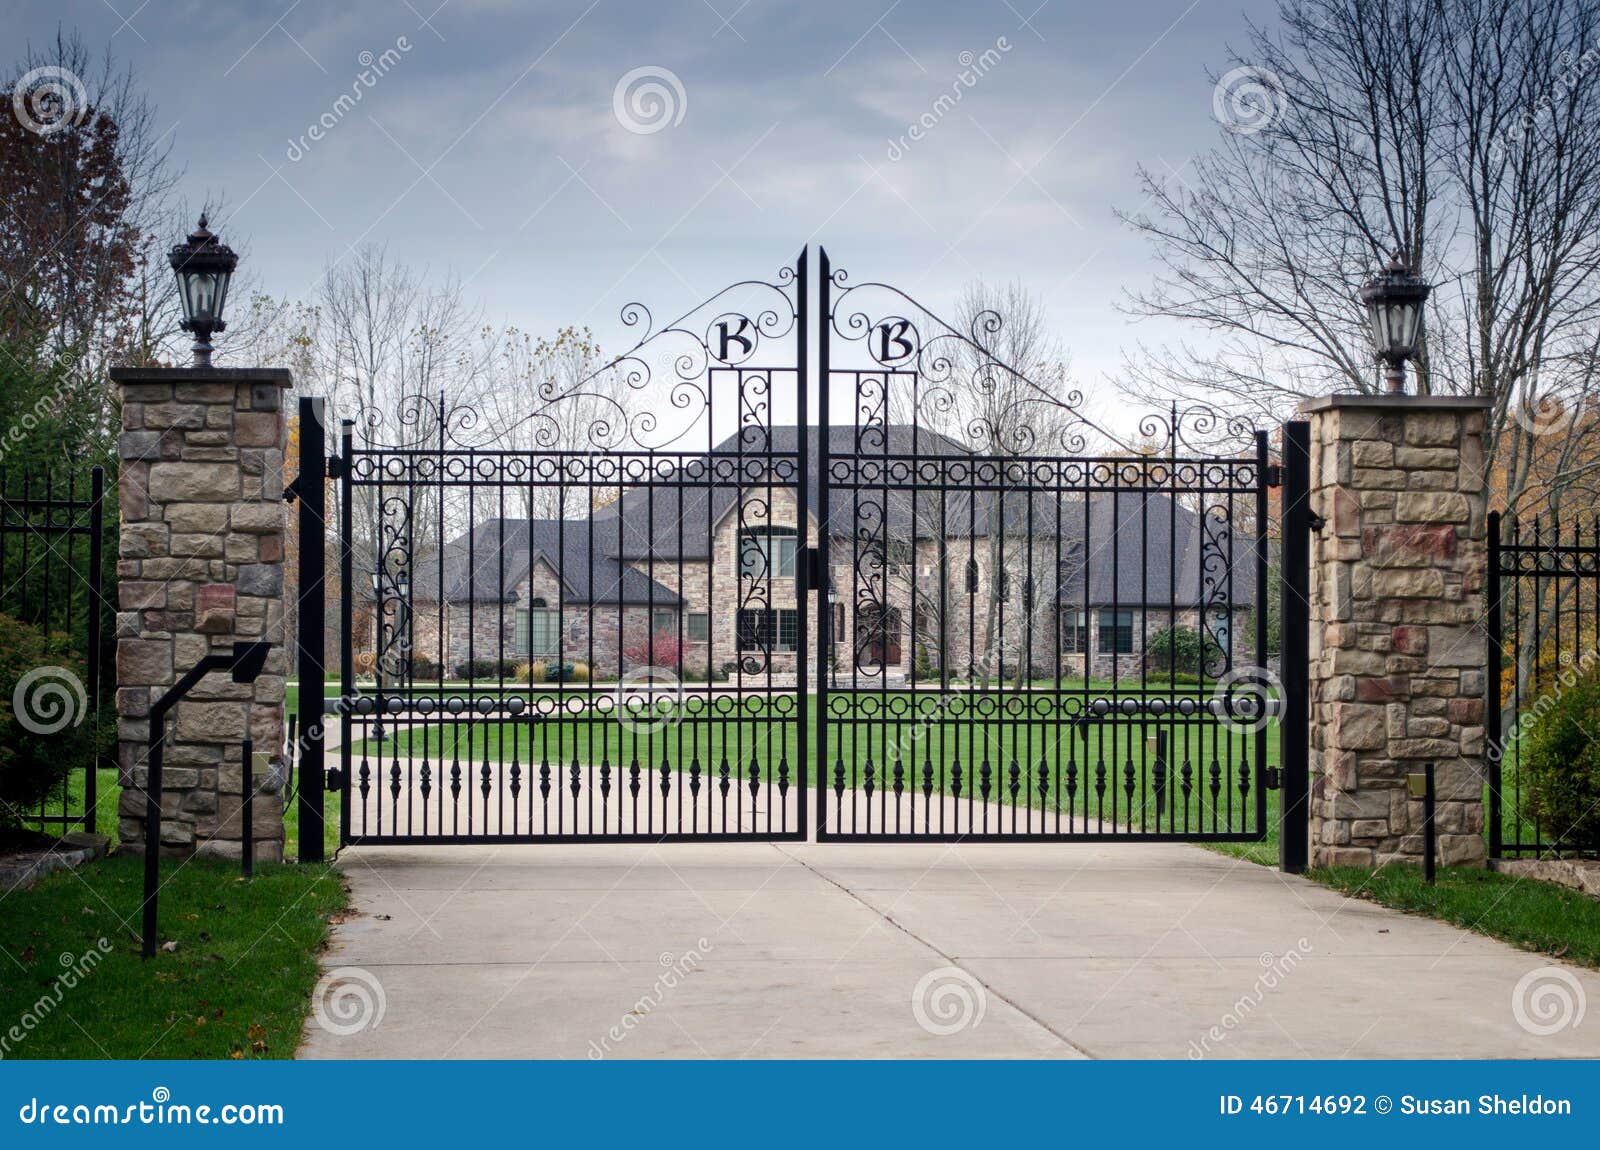 large fancy mansion behind a gated entry